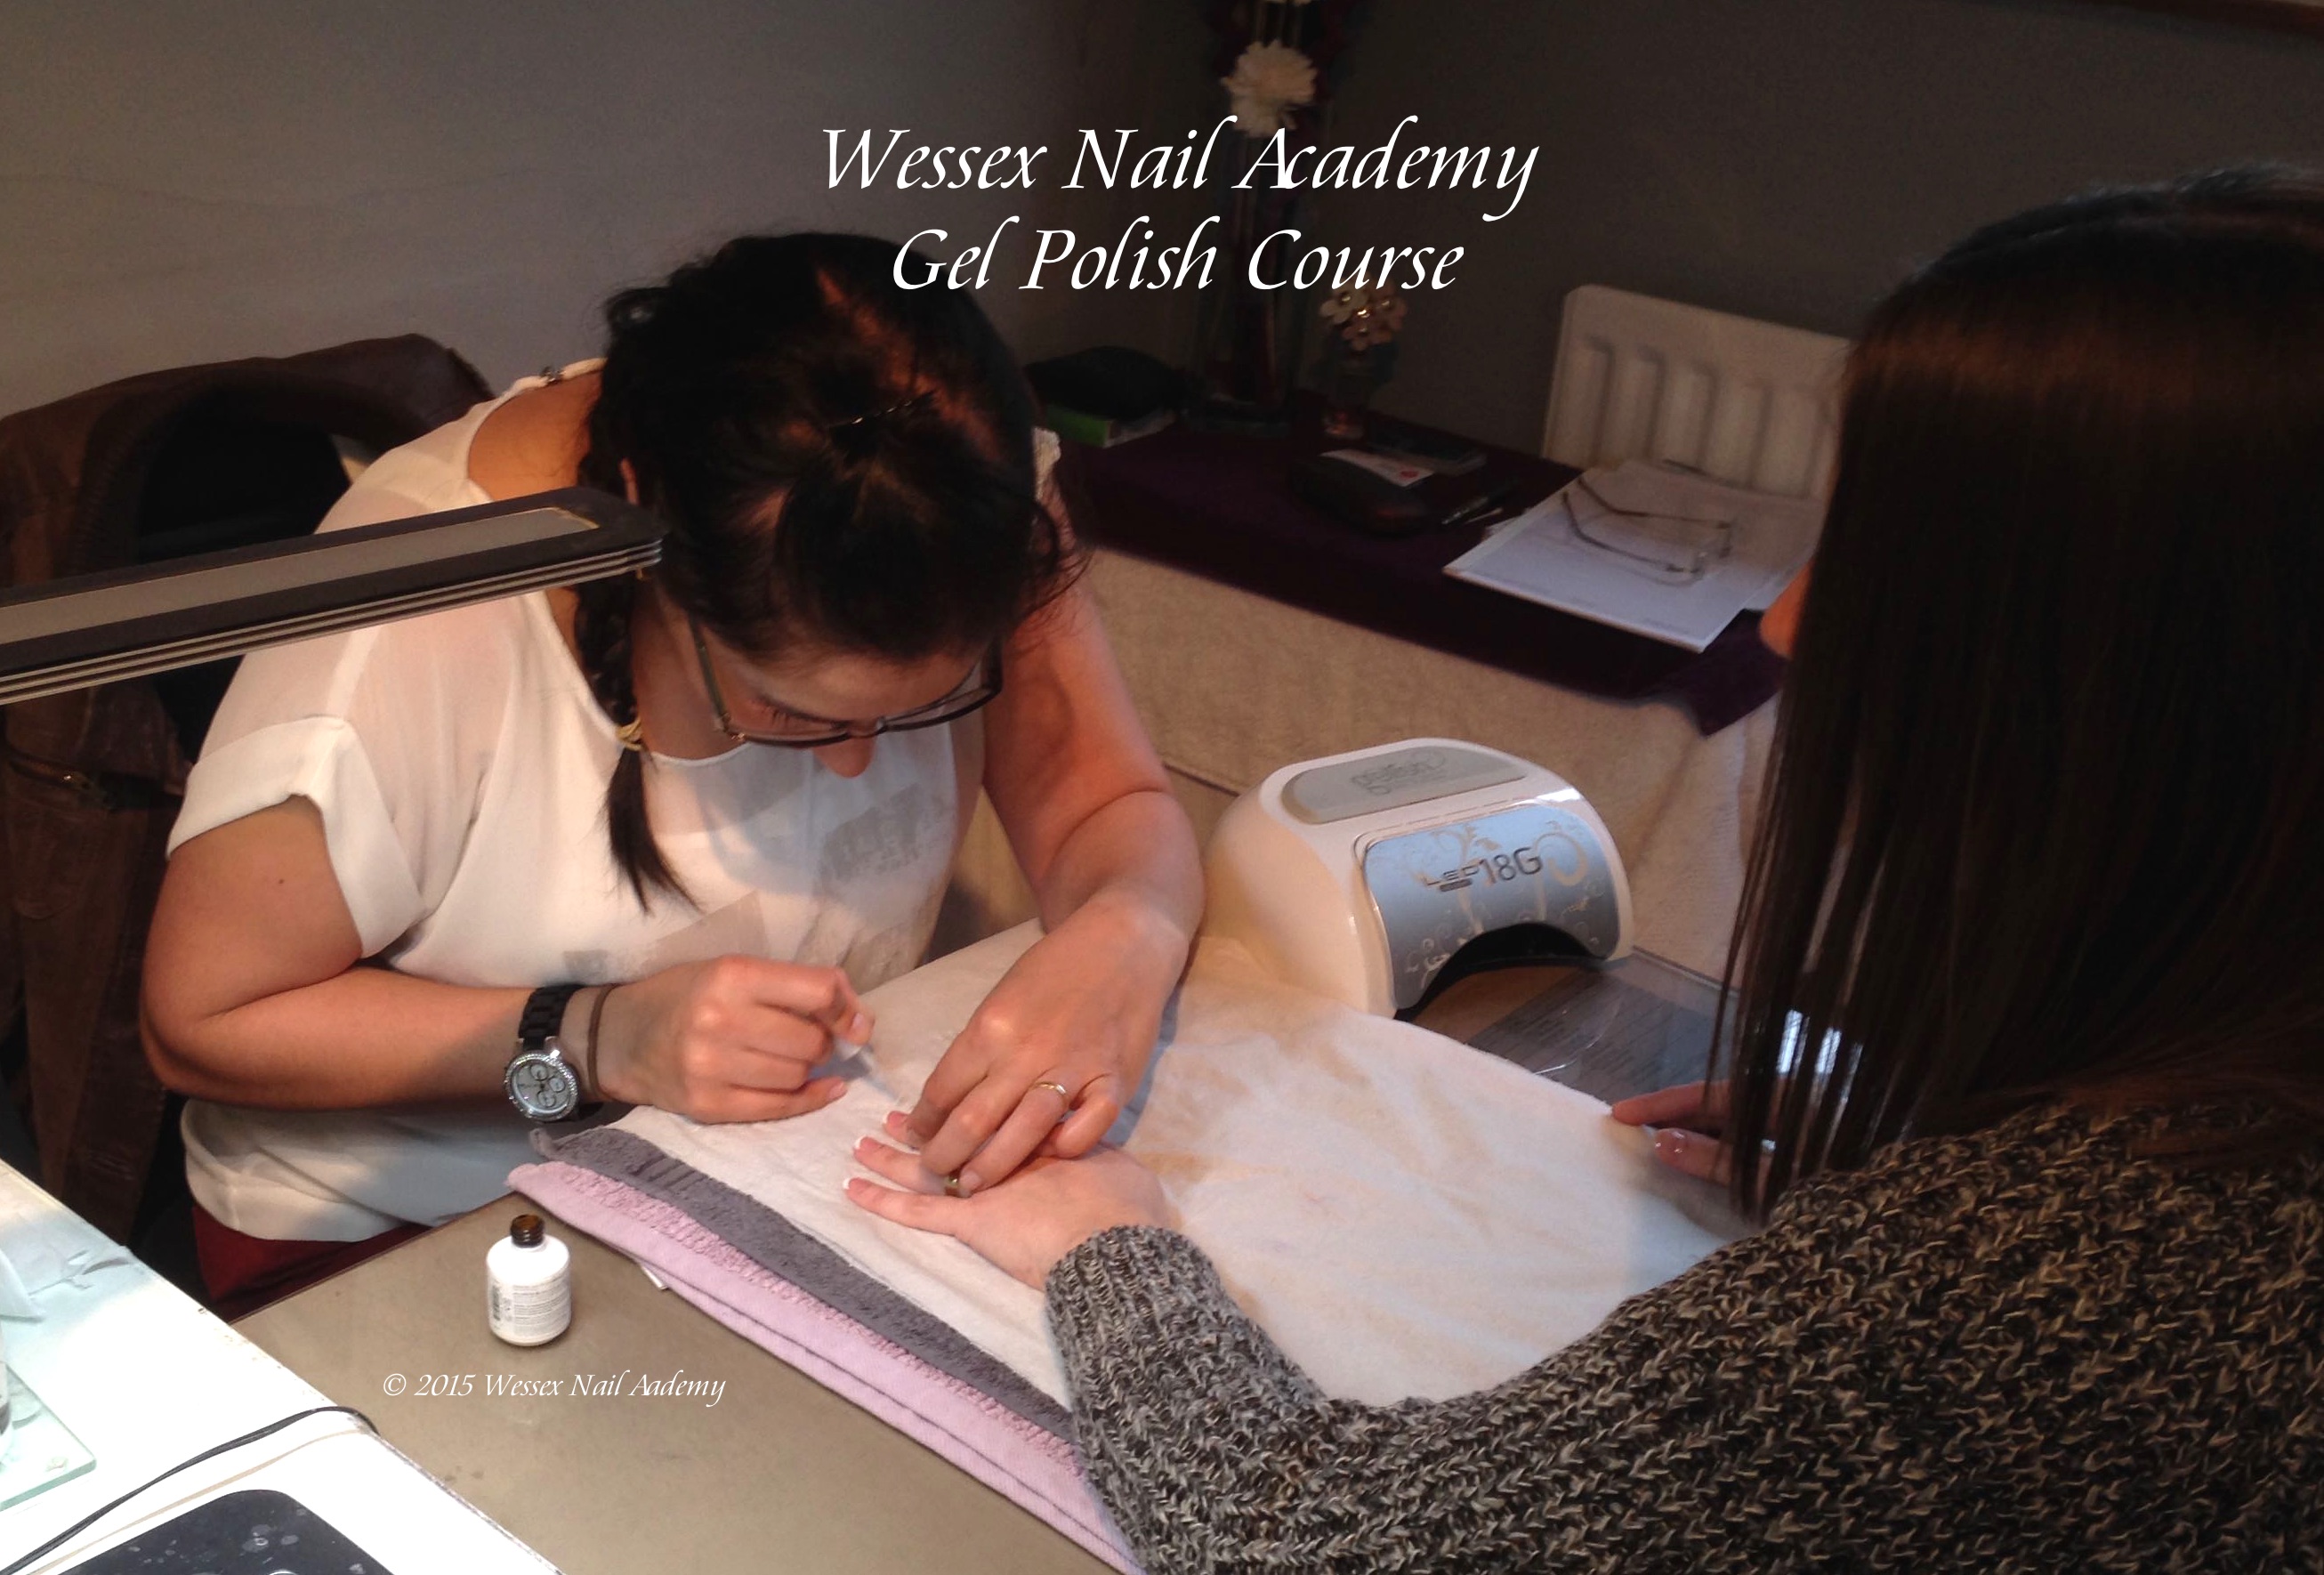 Gel Polish Beginners Manicure and Pedicure Course, Nail extension training, nail training course, Wessex Nail Academy Okeford Fitzpaine, Dorset